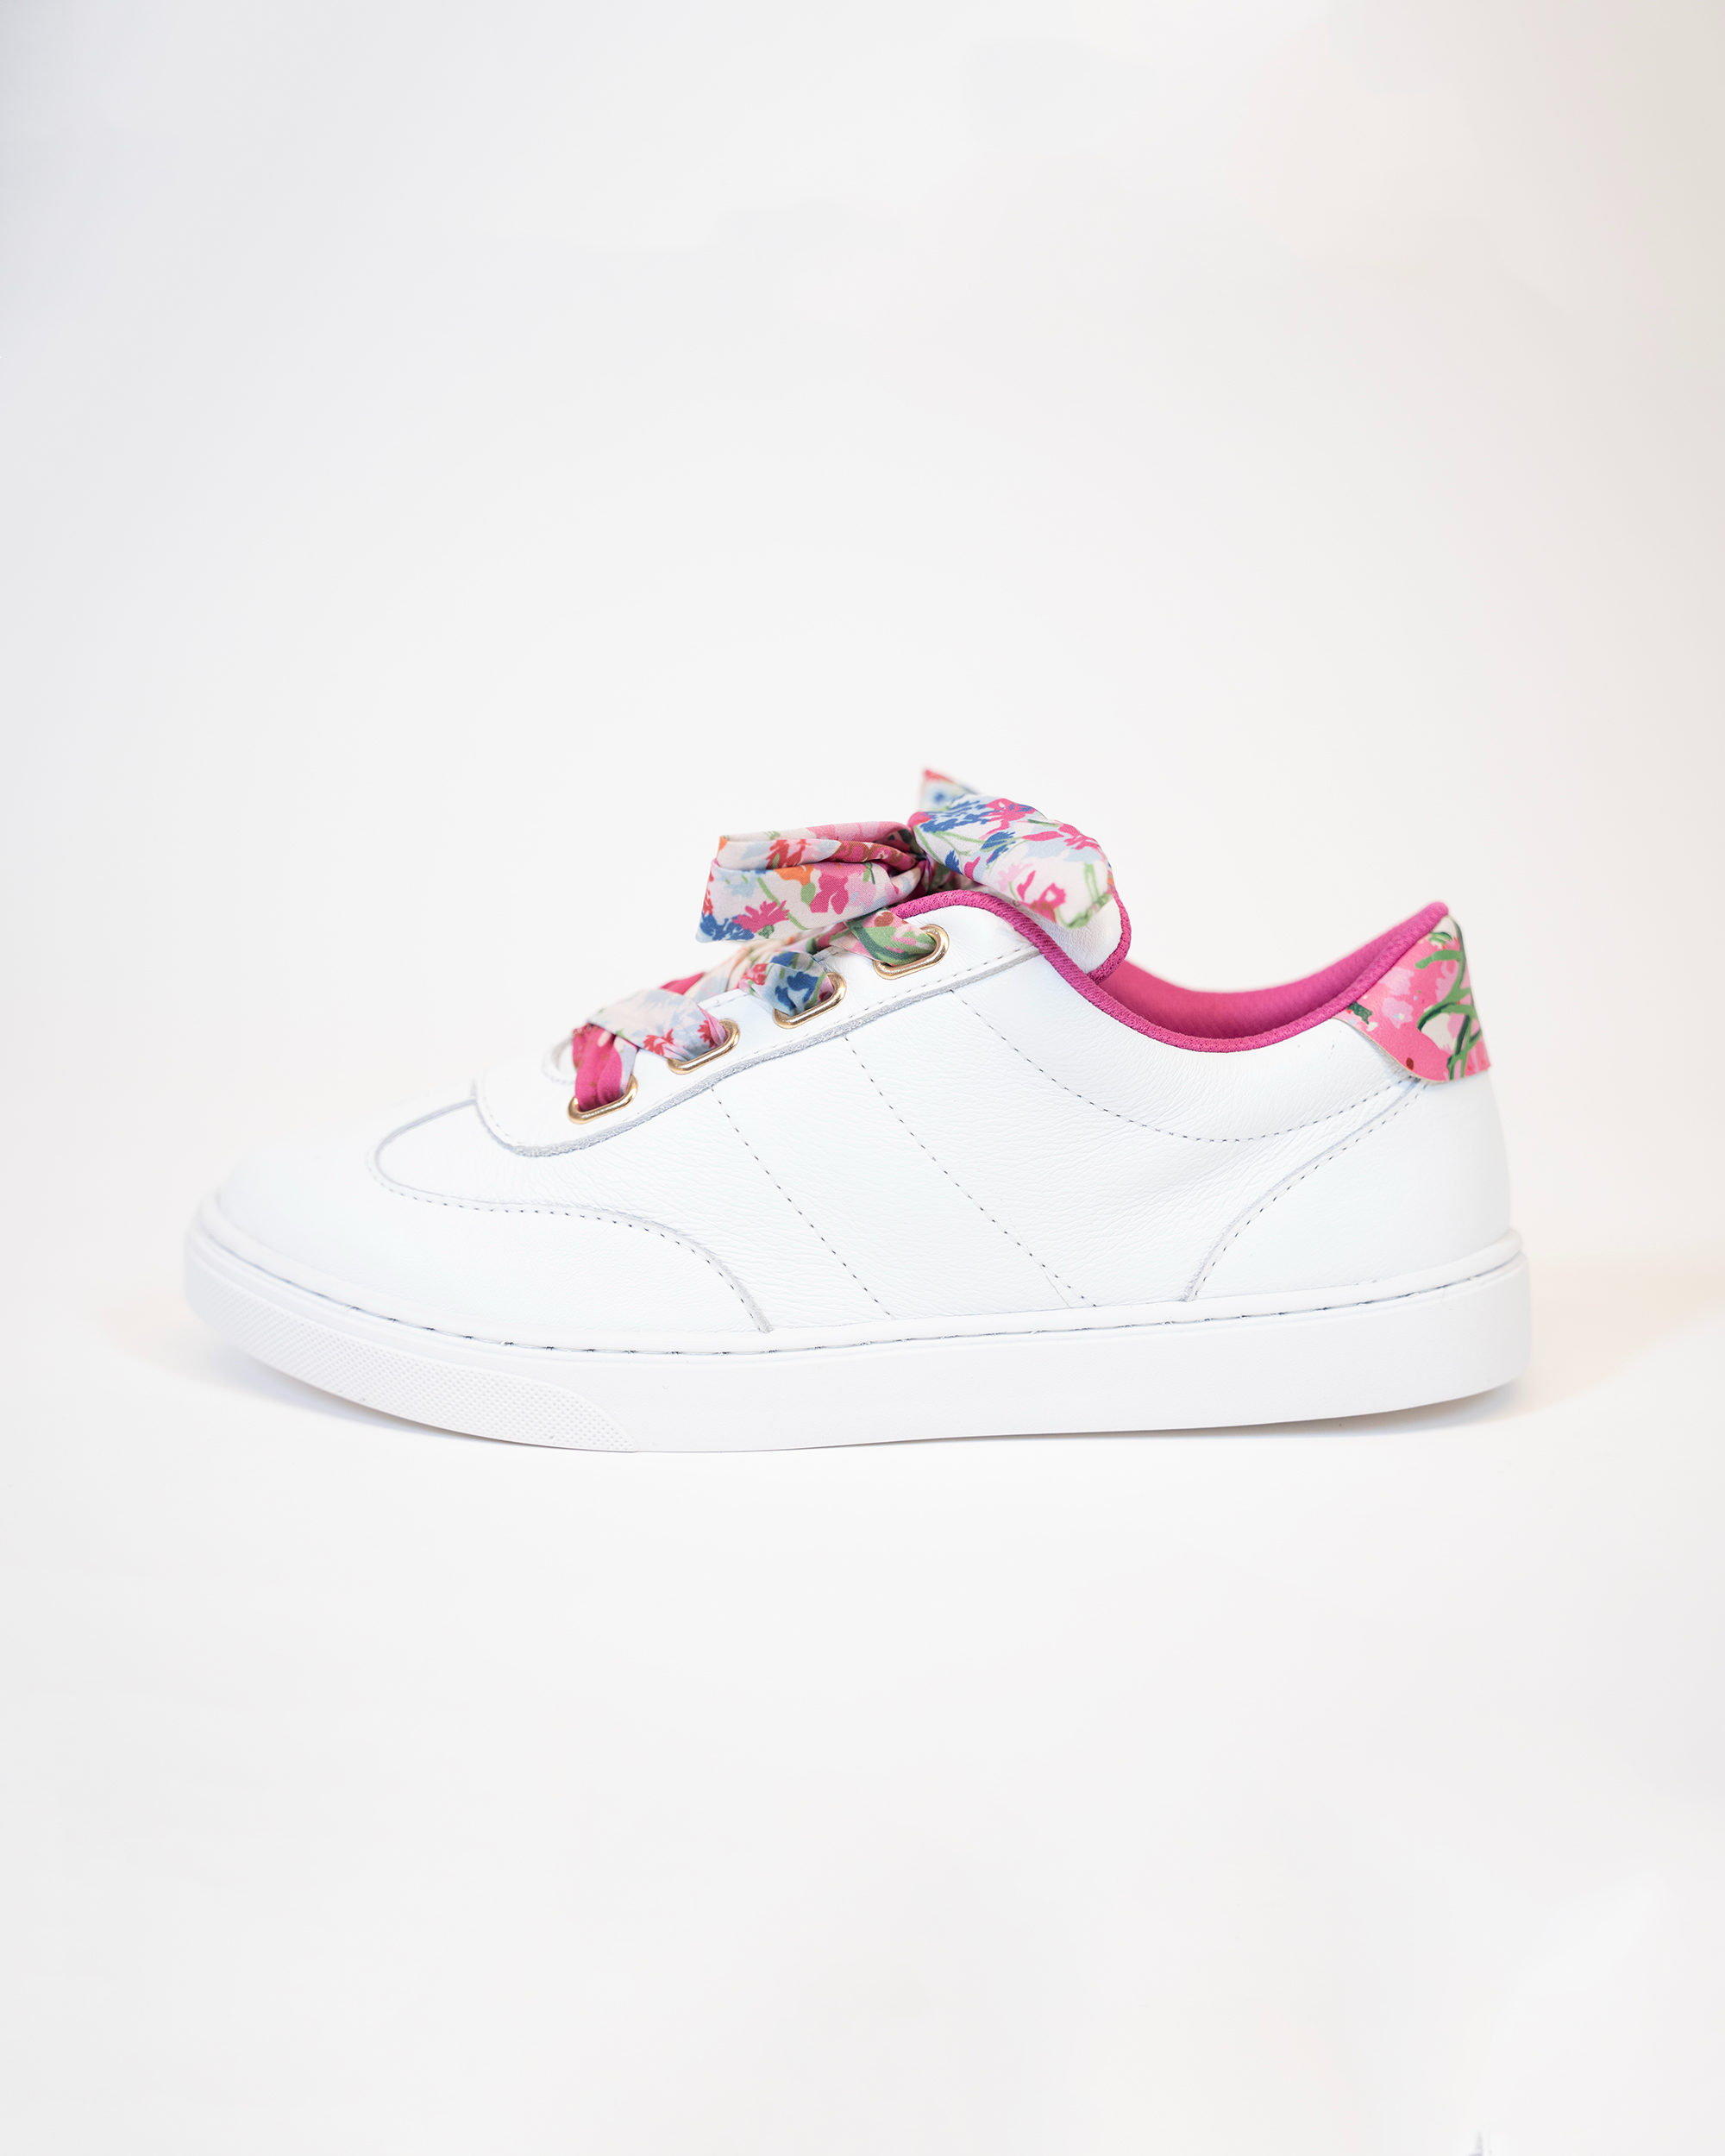 Floral Ribbon Lace Up Sneaker